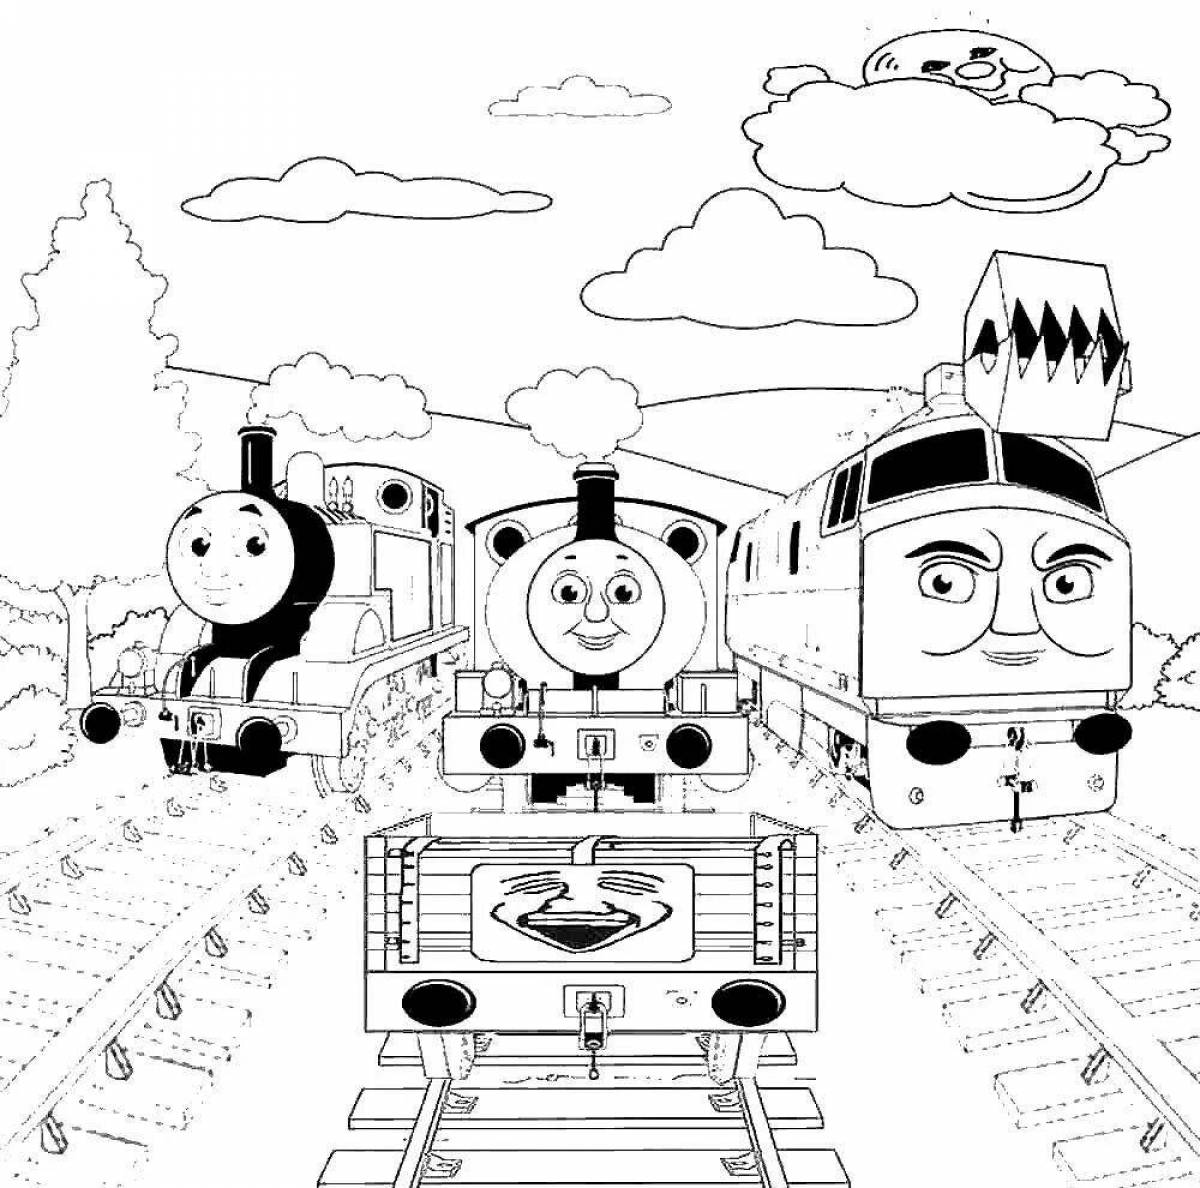 Innovative Thomas the Tank Engine coloring book for kids